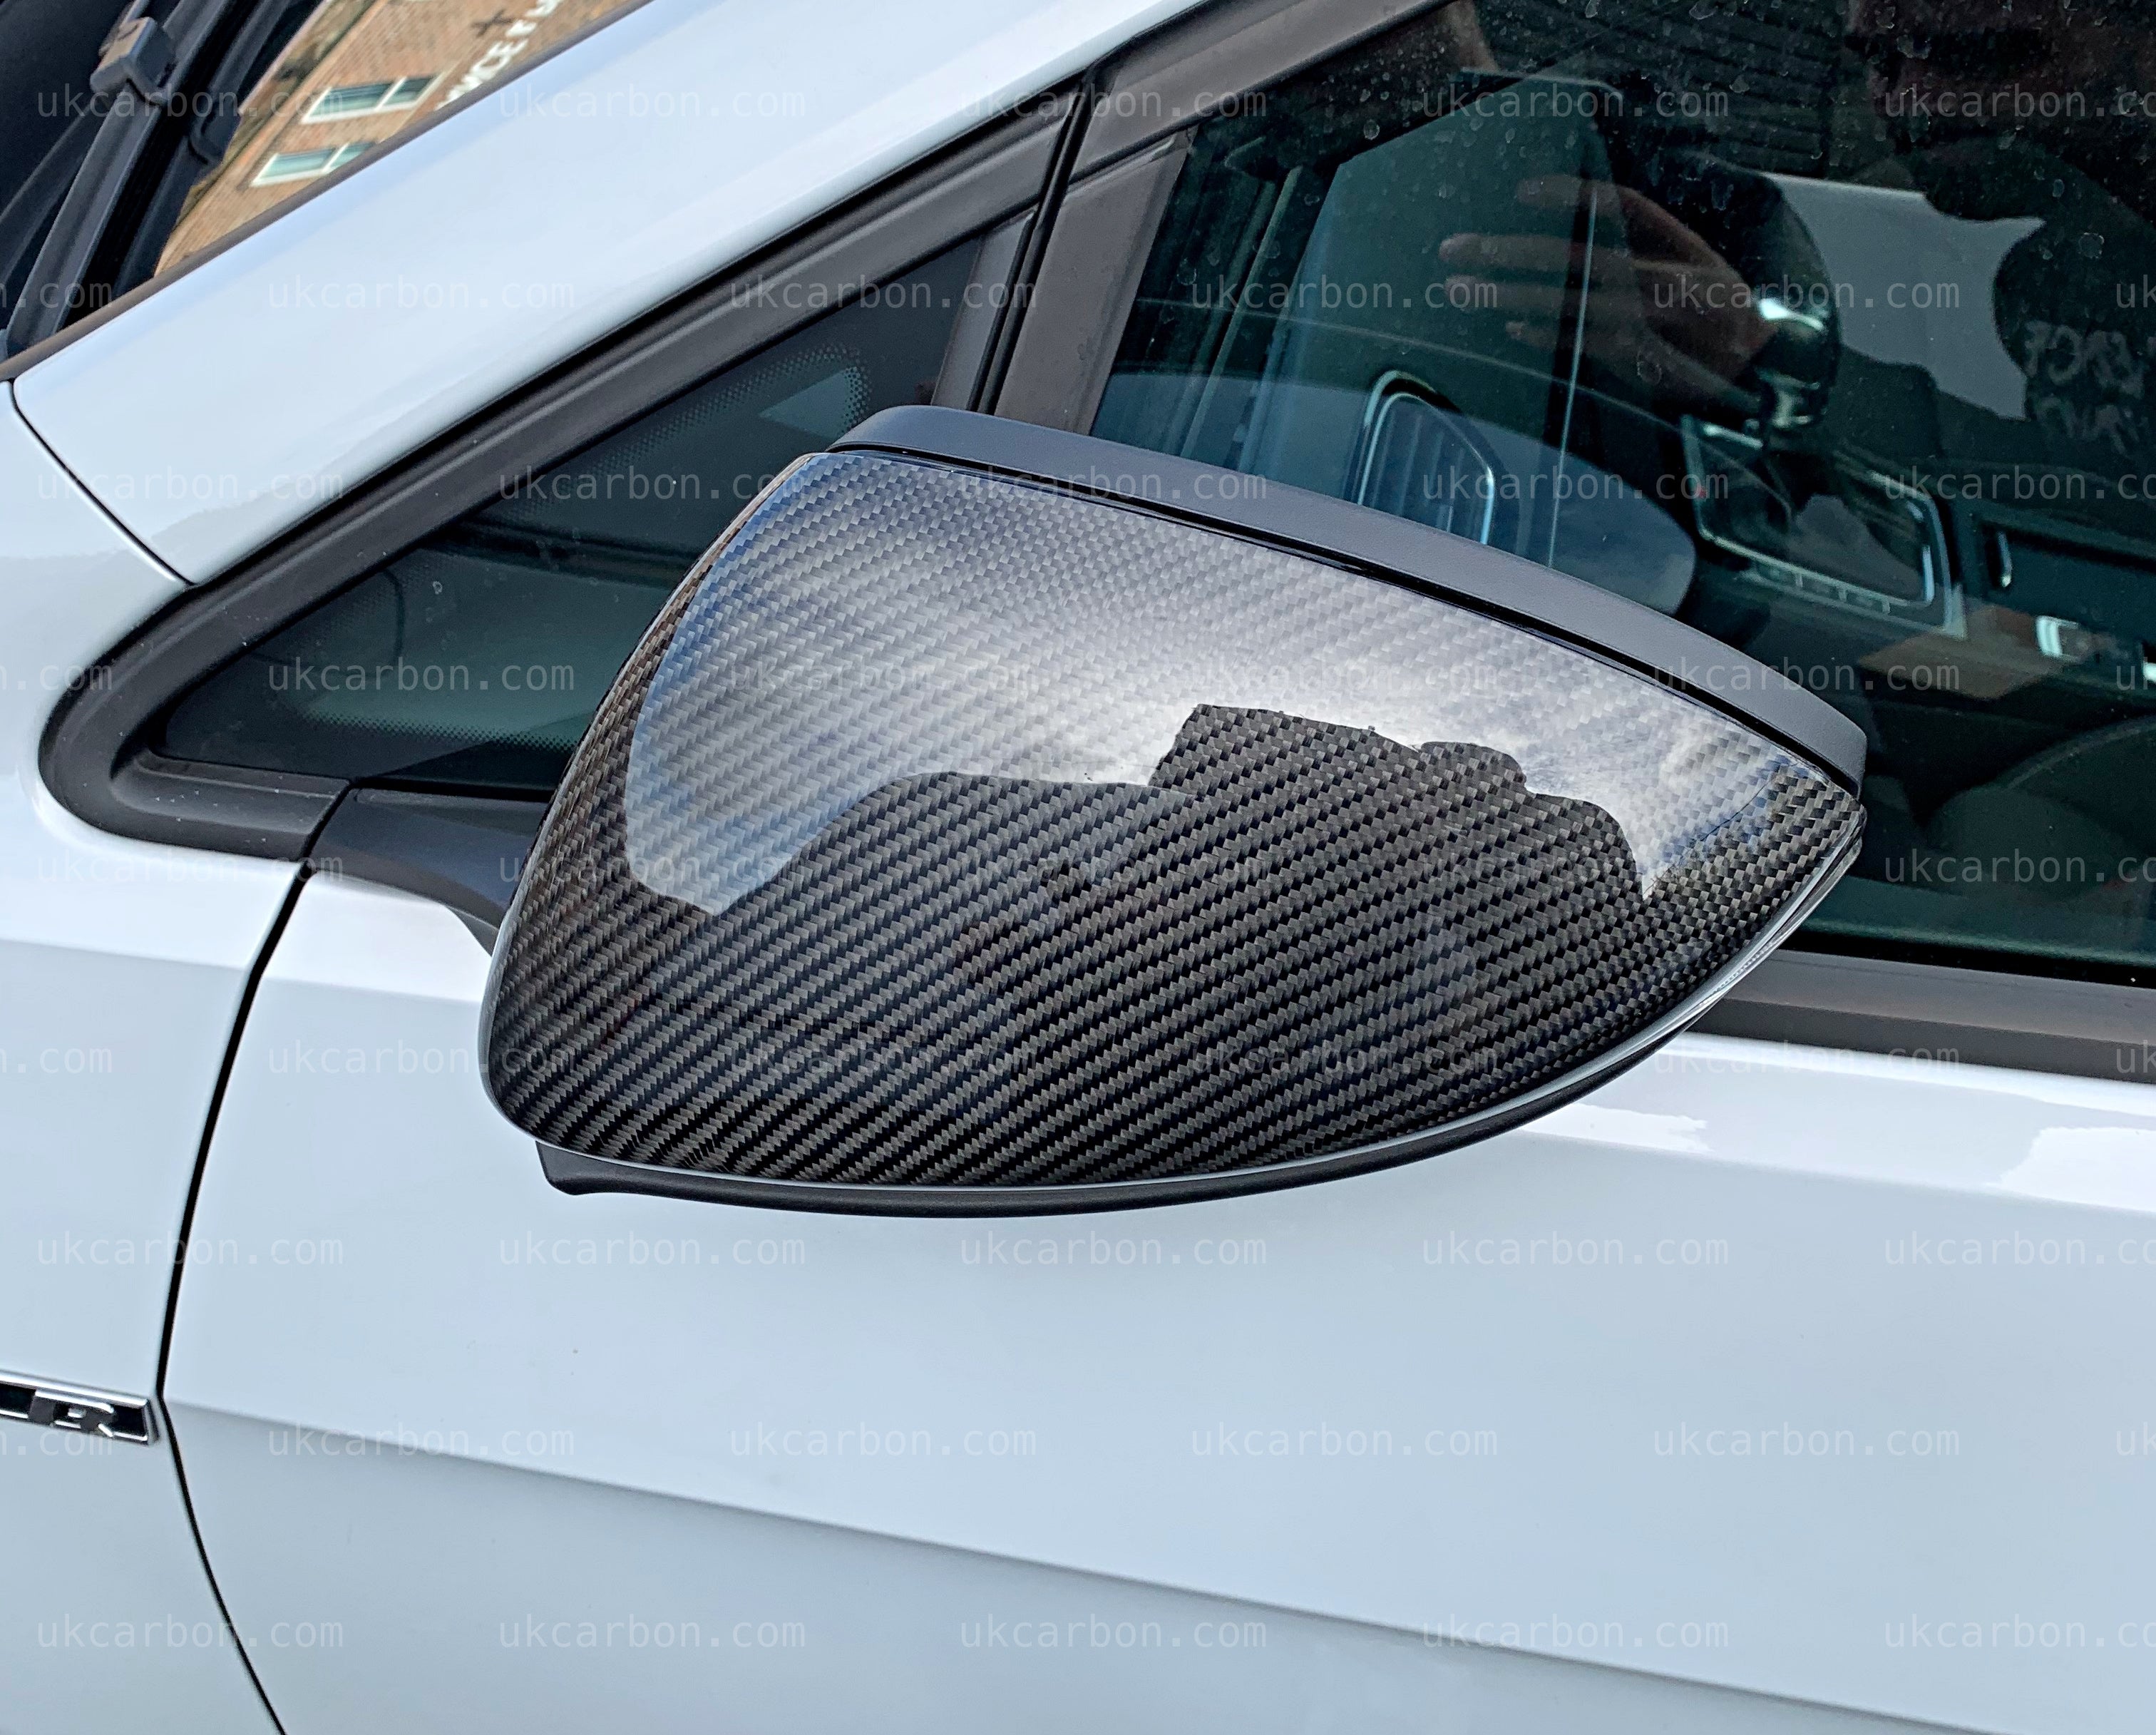 UKCARBON Carbon Fibre Wing Mirror Cover Replacements For VW Golf MK7 GTD TDI